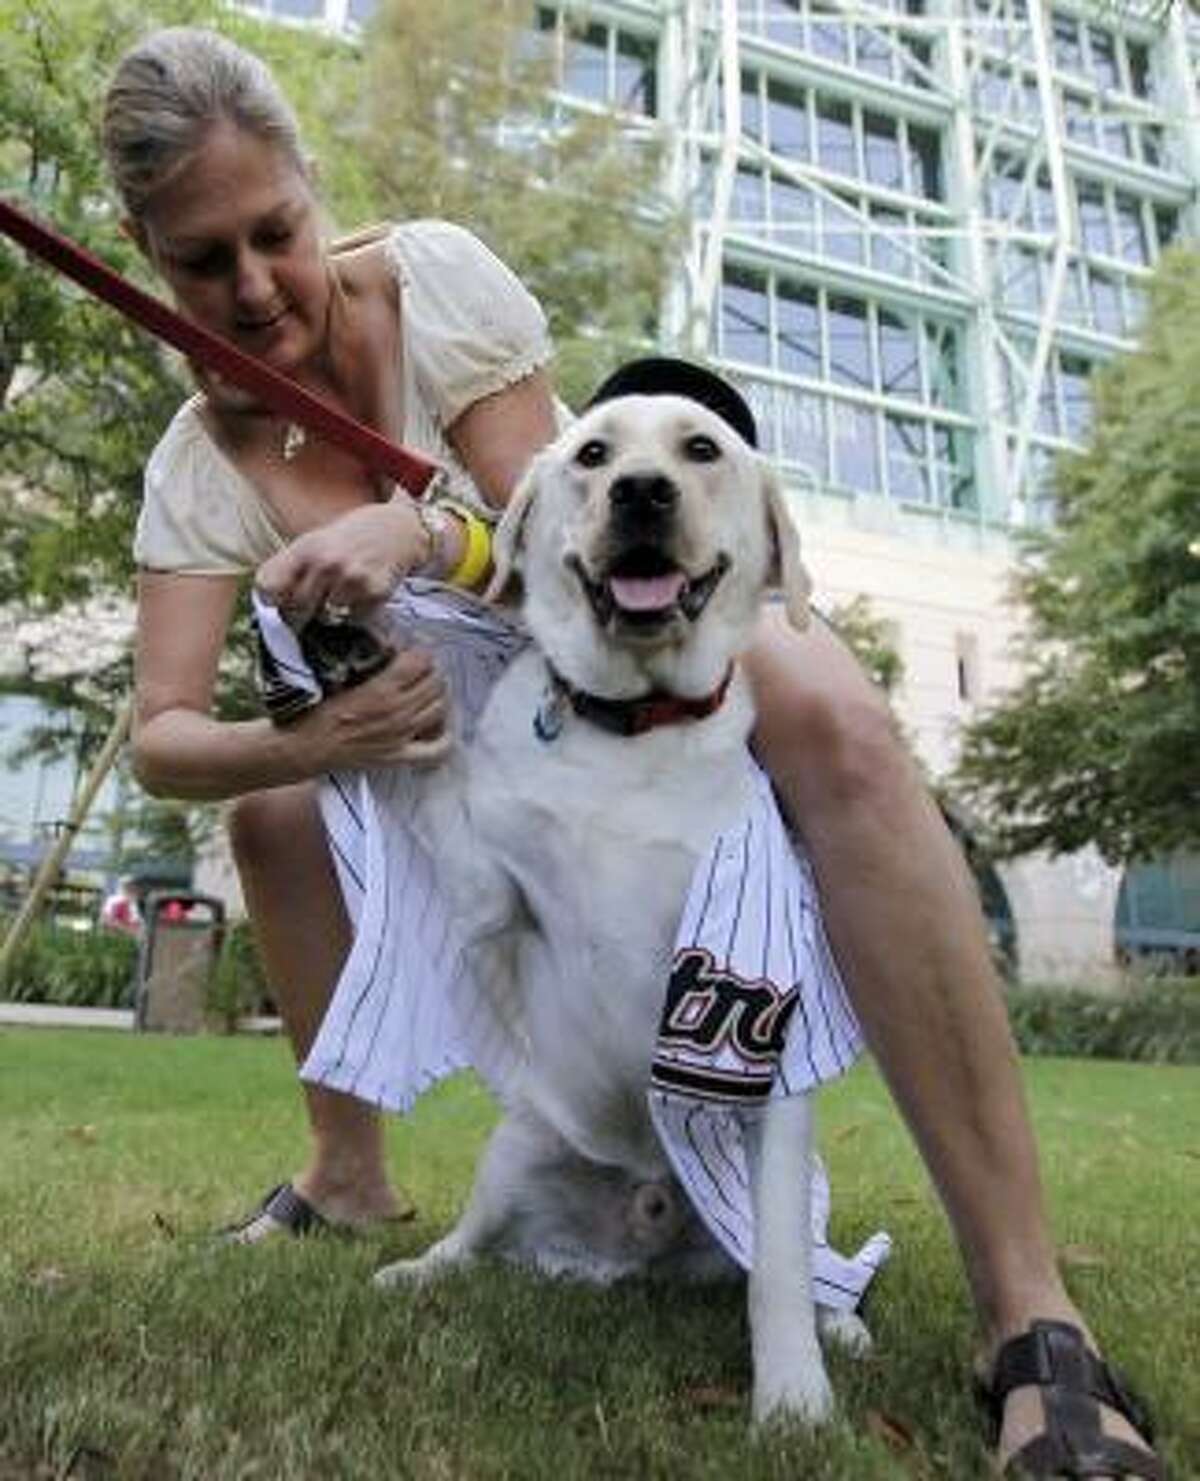 Jan Cohen puts a Houston Astros "Barkman" jersey on her dog Captain outside Minute Maid Park before the start of the Astros and Philadelphia Phillies baseball game.